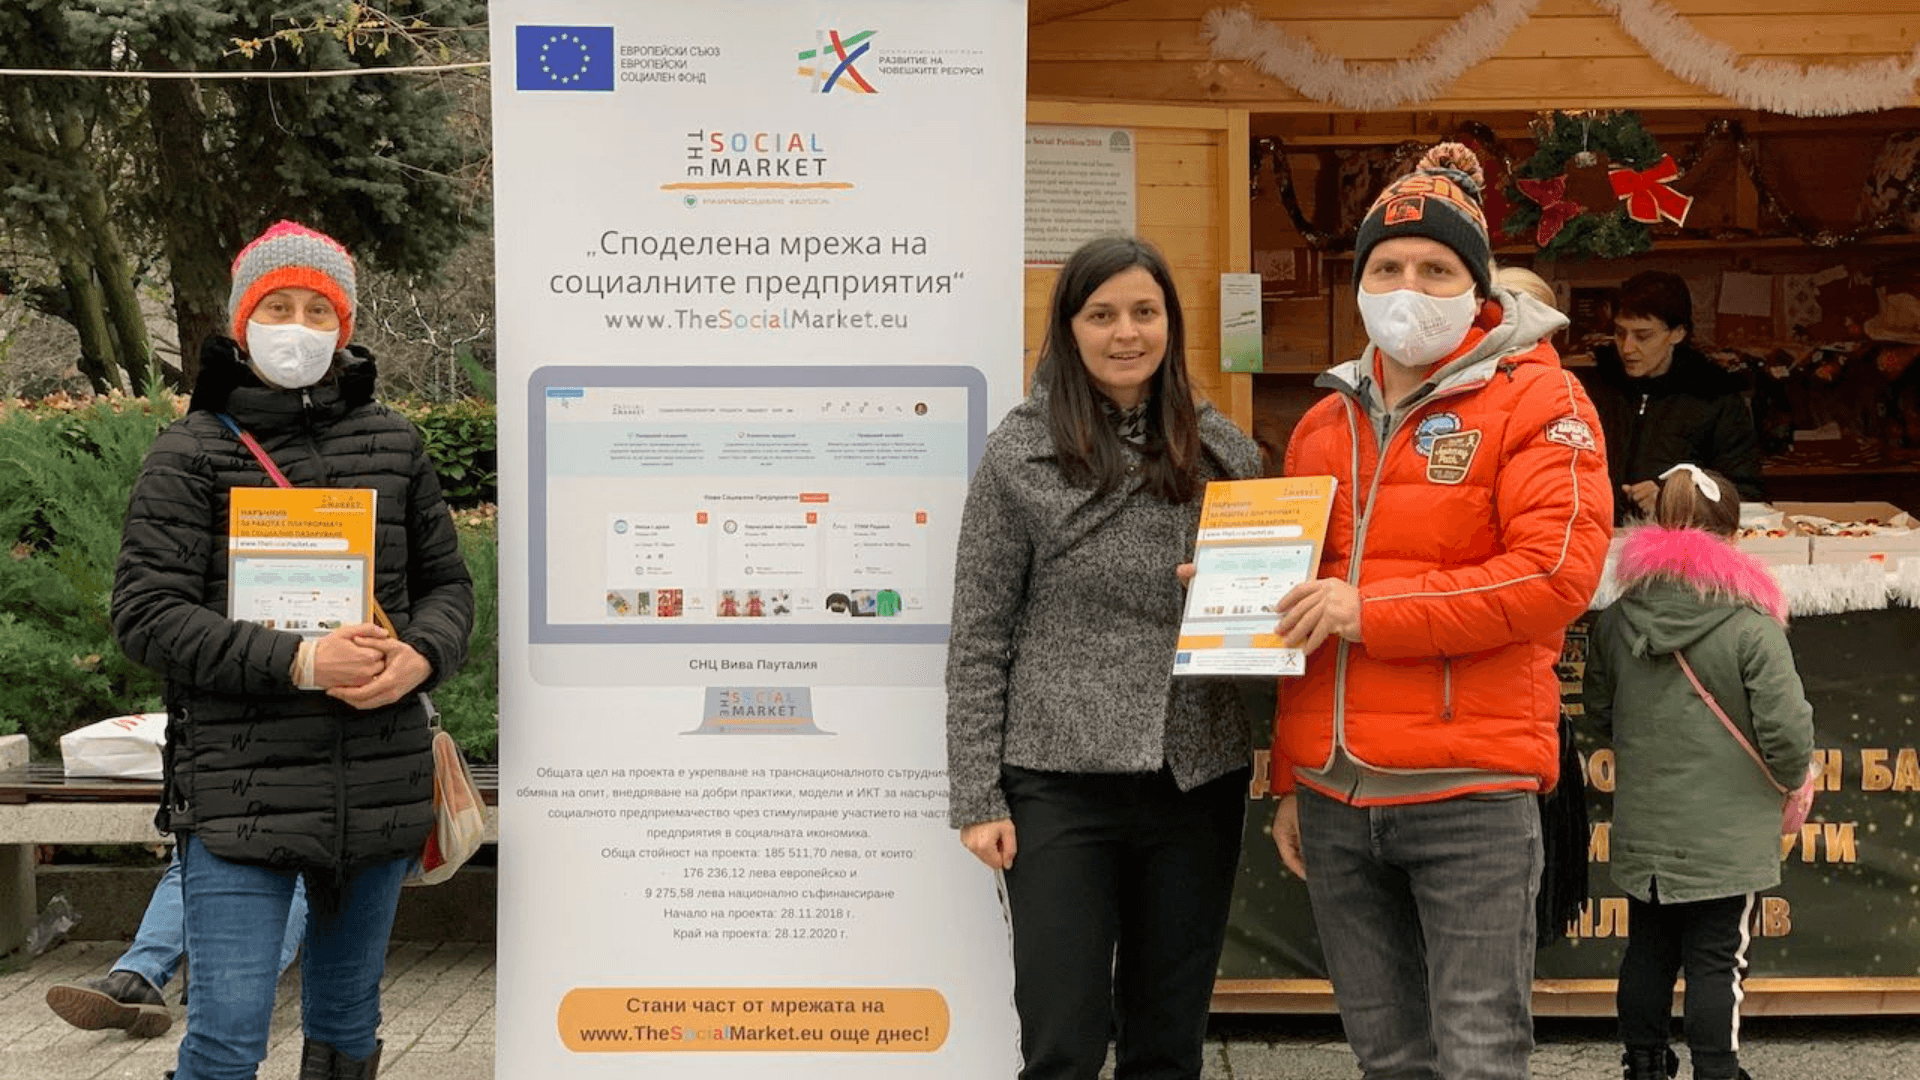 Participants of the “TheSocialMarket.eu” project, posing in front of their banner